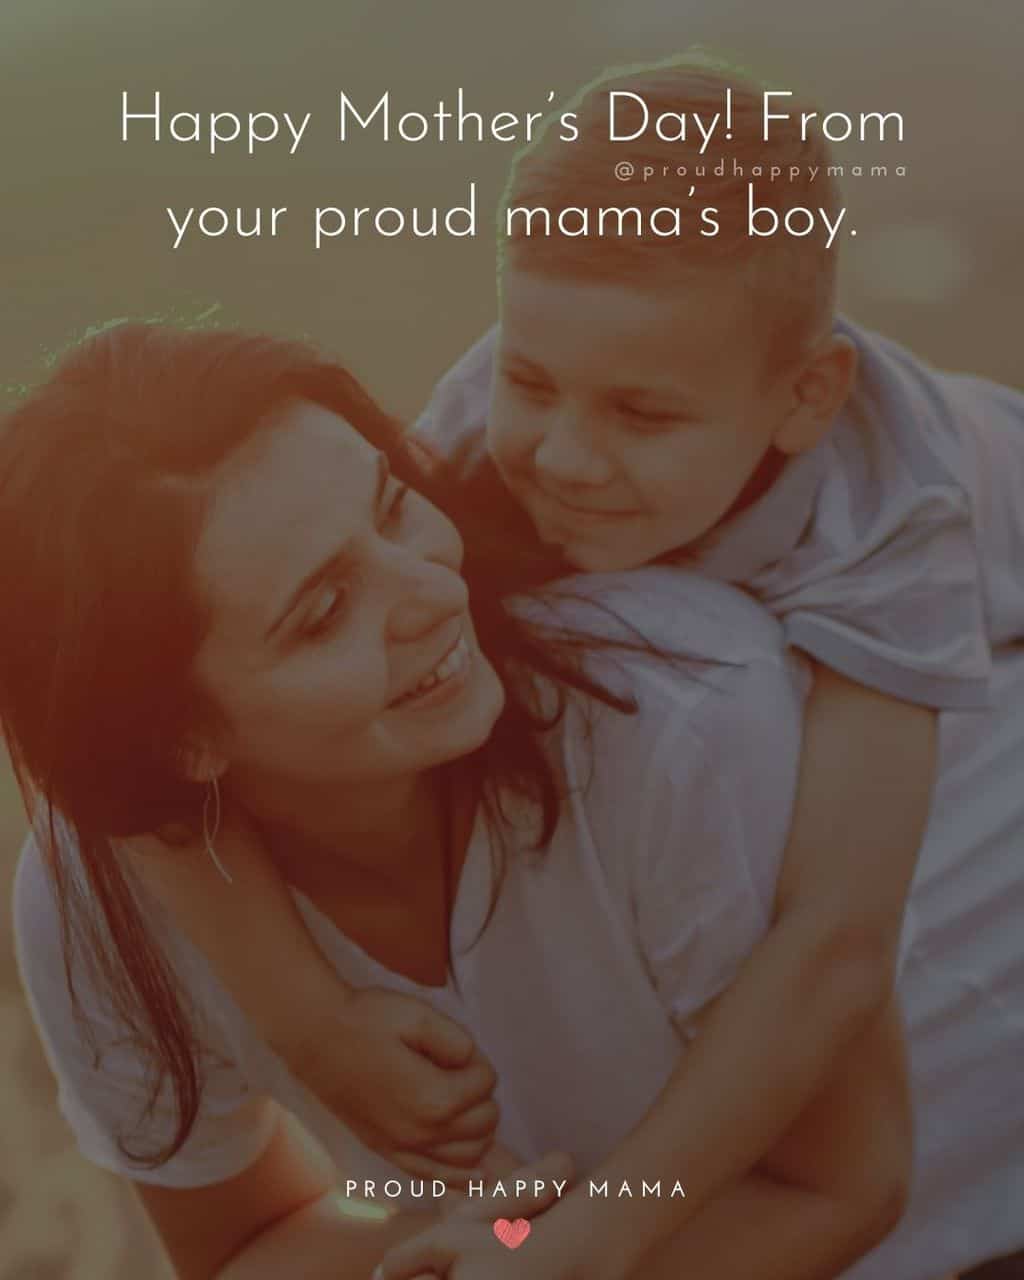 Happy Mothers Day Quotes From Son - Happy Mother’s Day! From your proud mama’s boy.’